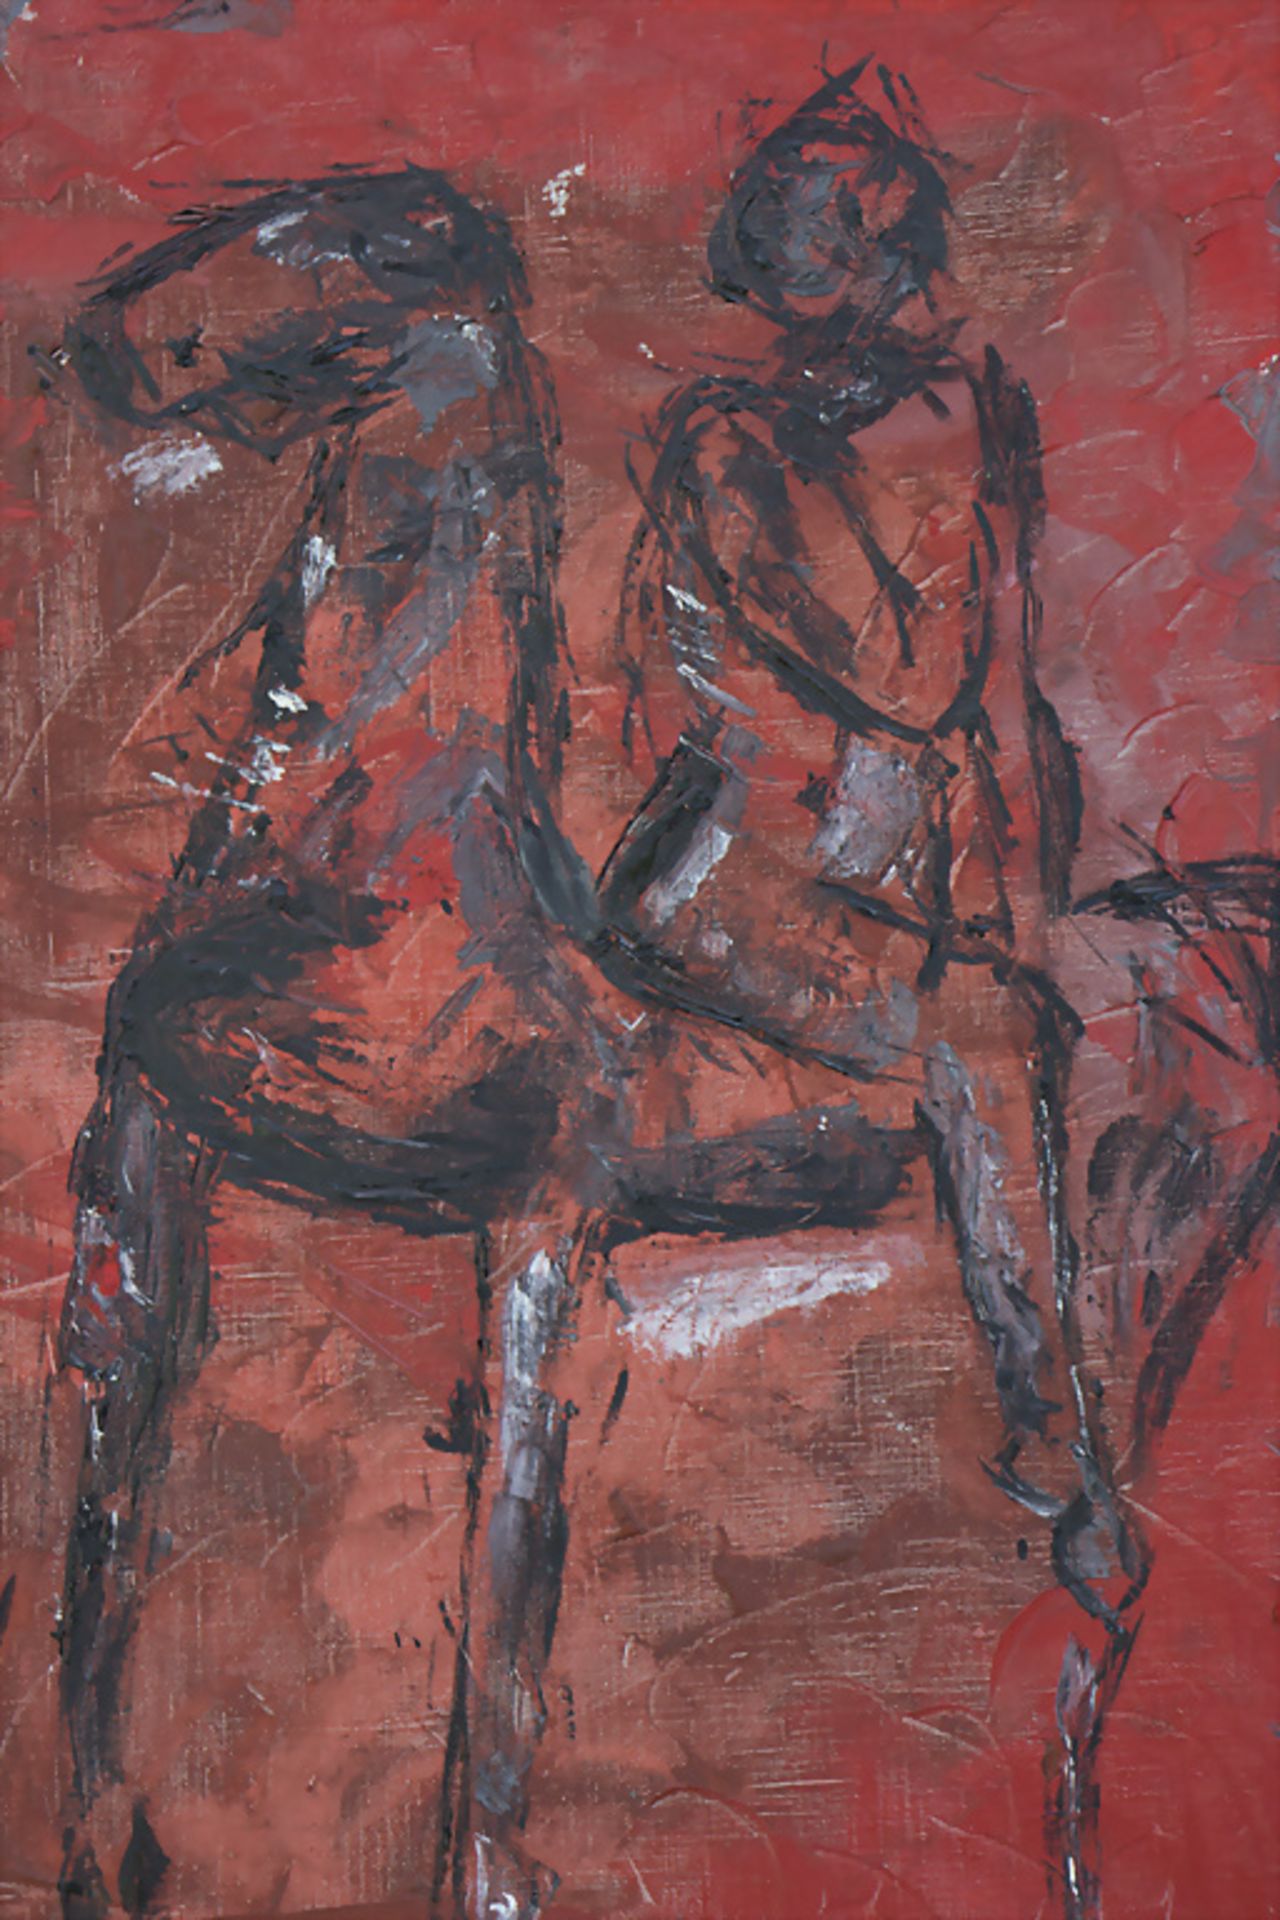 Eberhard Heyd, 'Roter Reiter' / 'Red rider', 1965 - Image 3 of 7